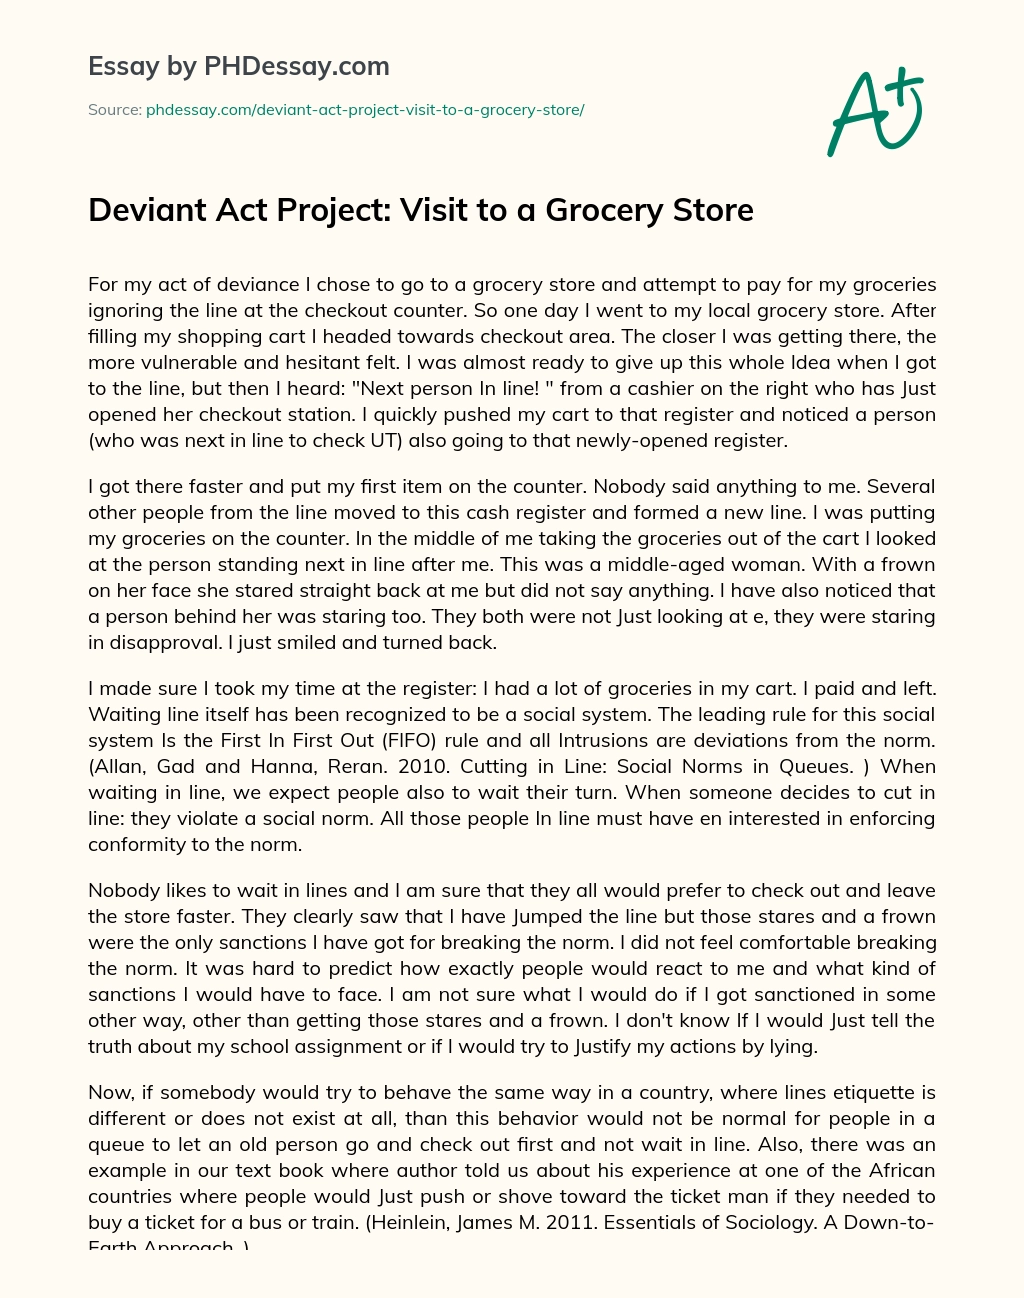 Deviant Act Project: Visit to a Grocery Store essay